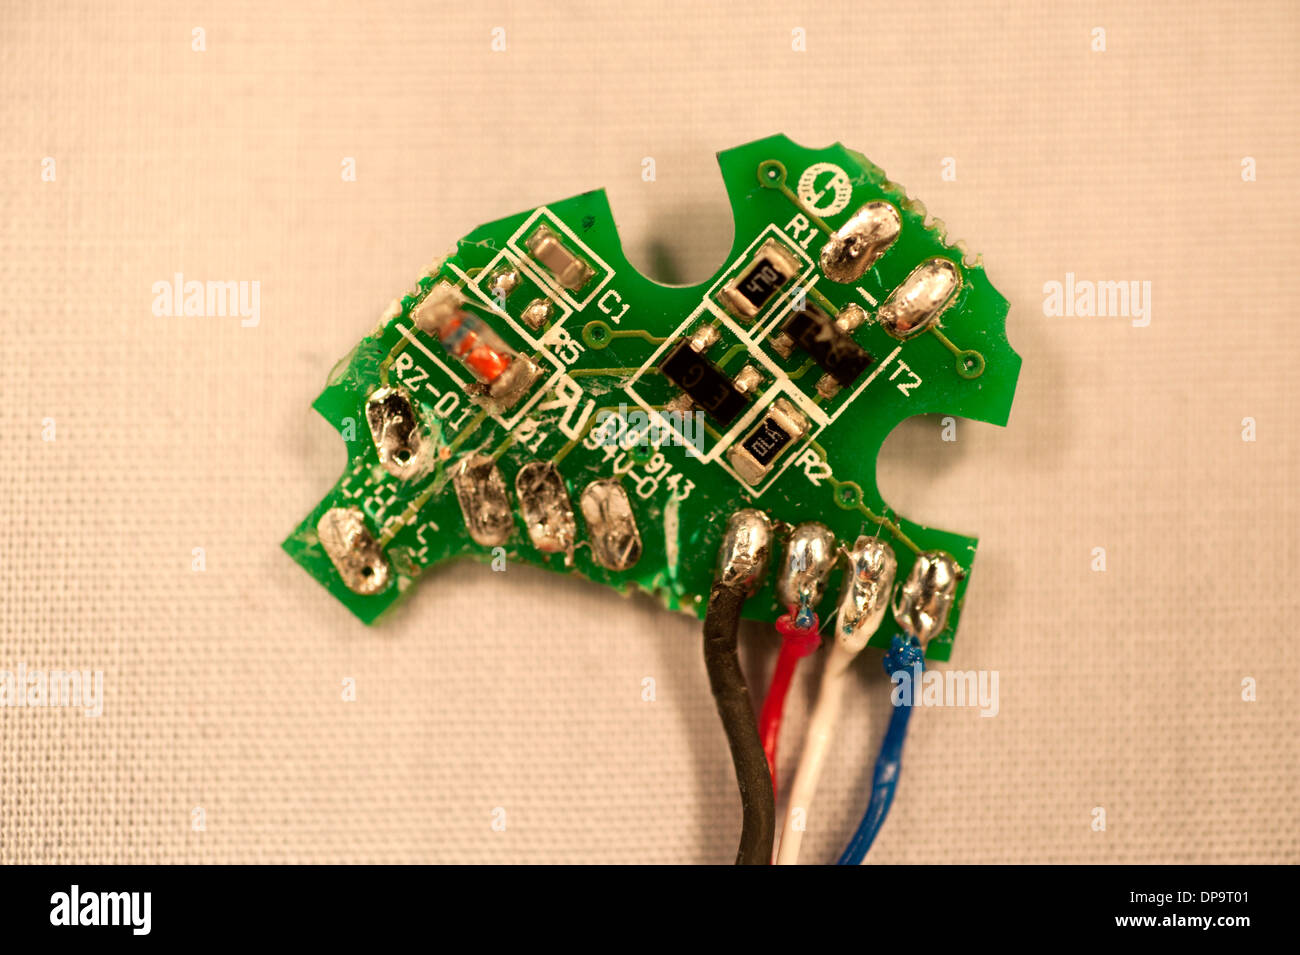 Miniature Circuit Board PCB Inside headset Wires Stock Photo